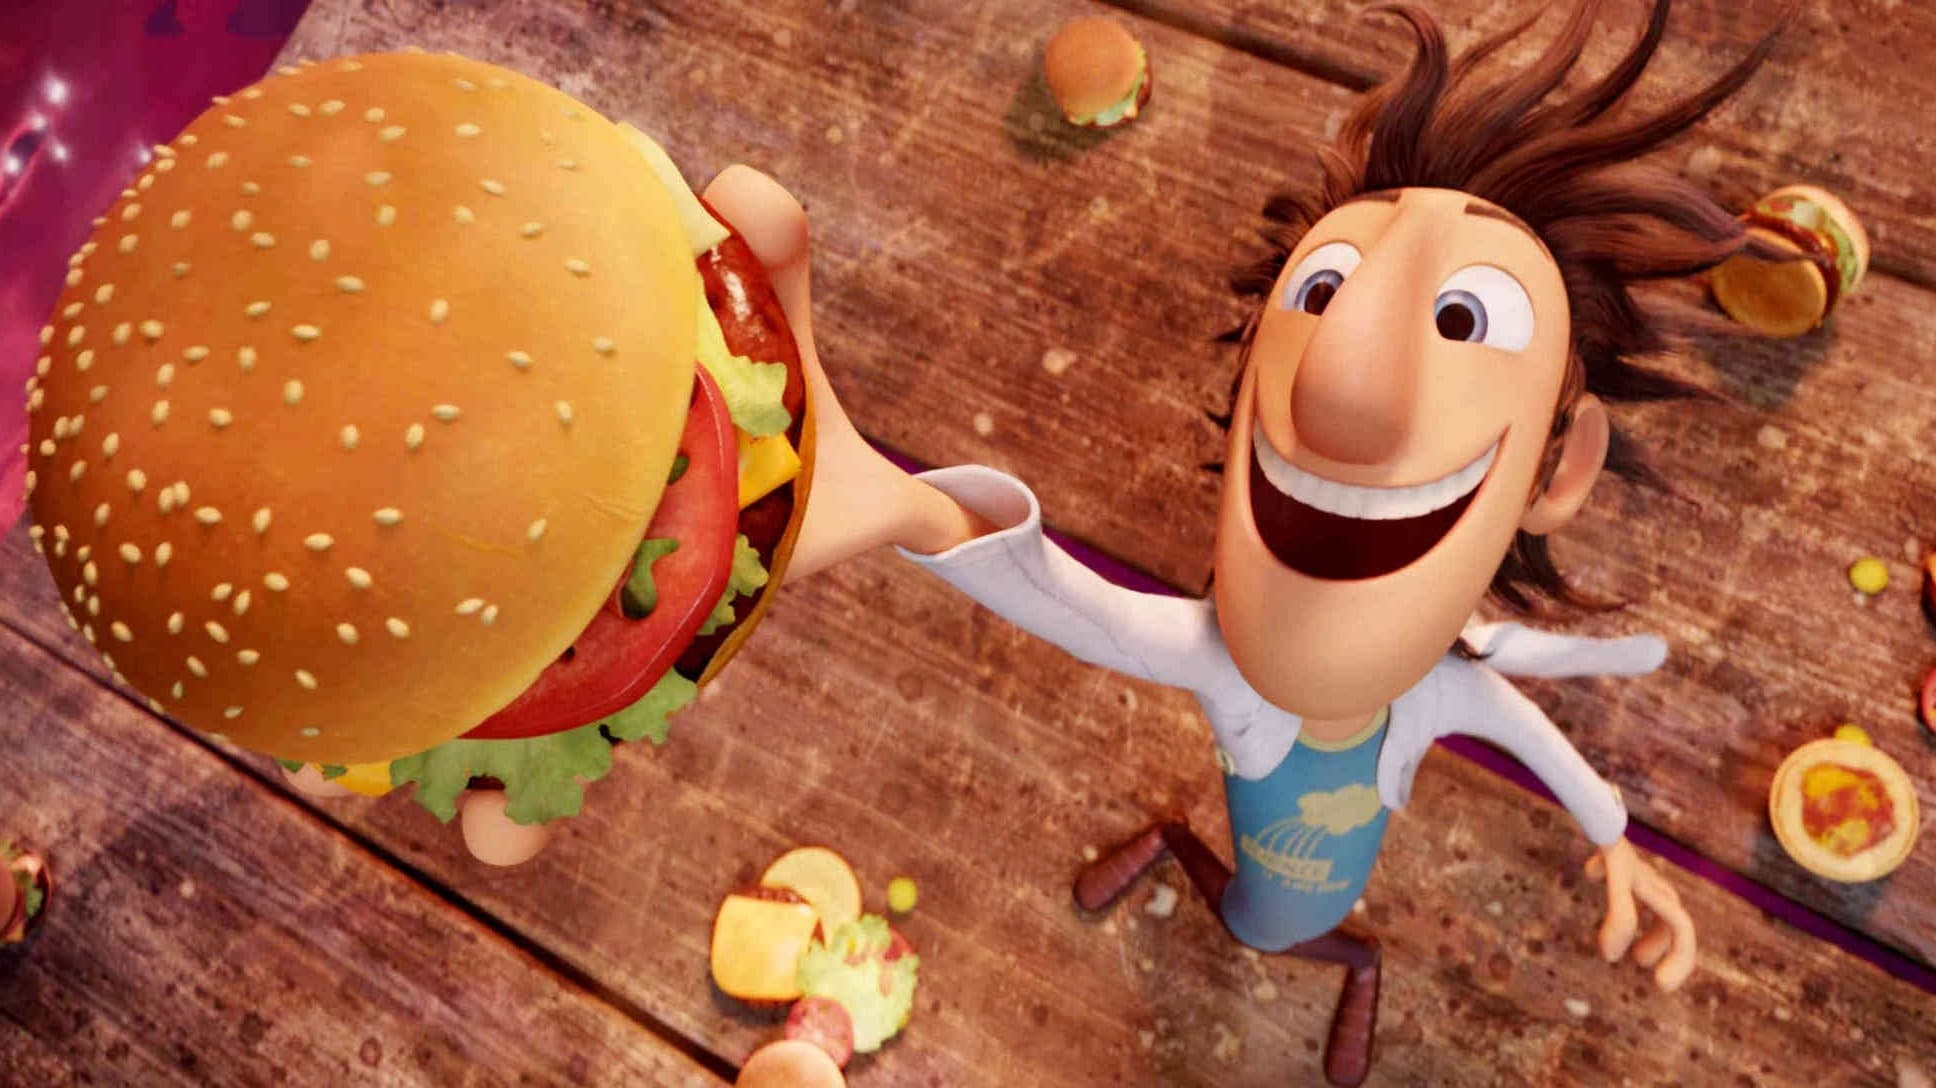 Cloudy with a Chance of Meatballs. 